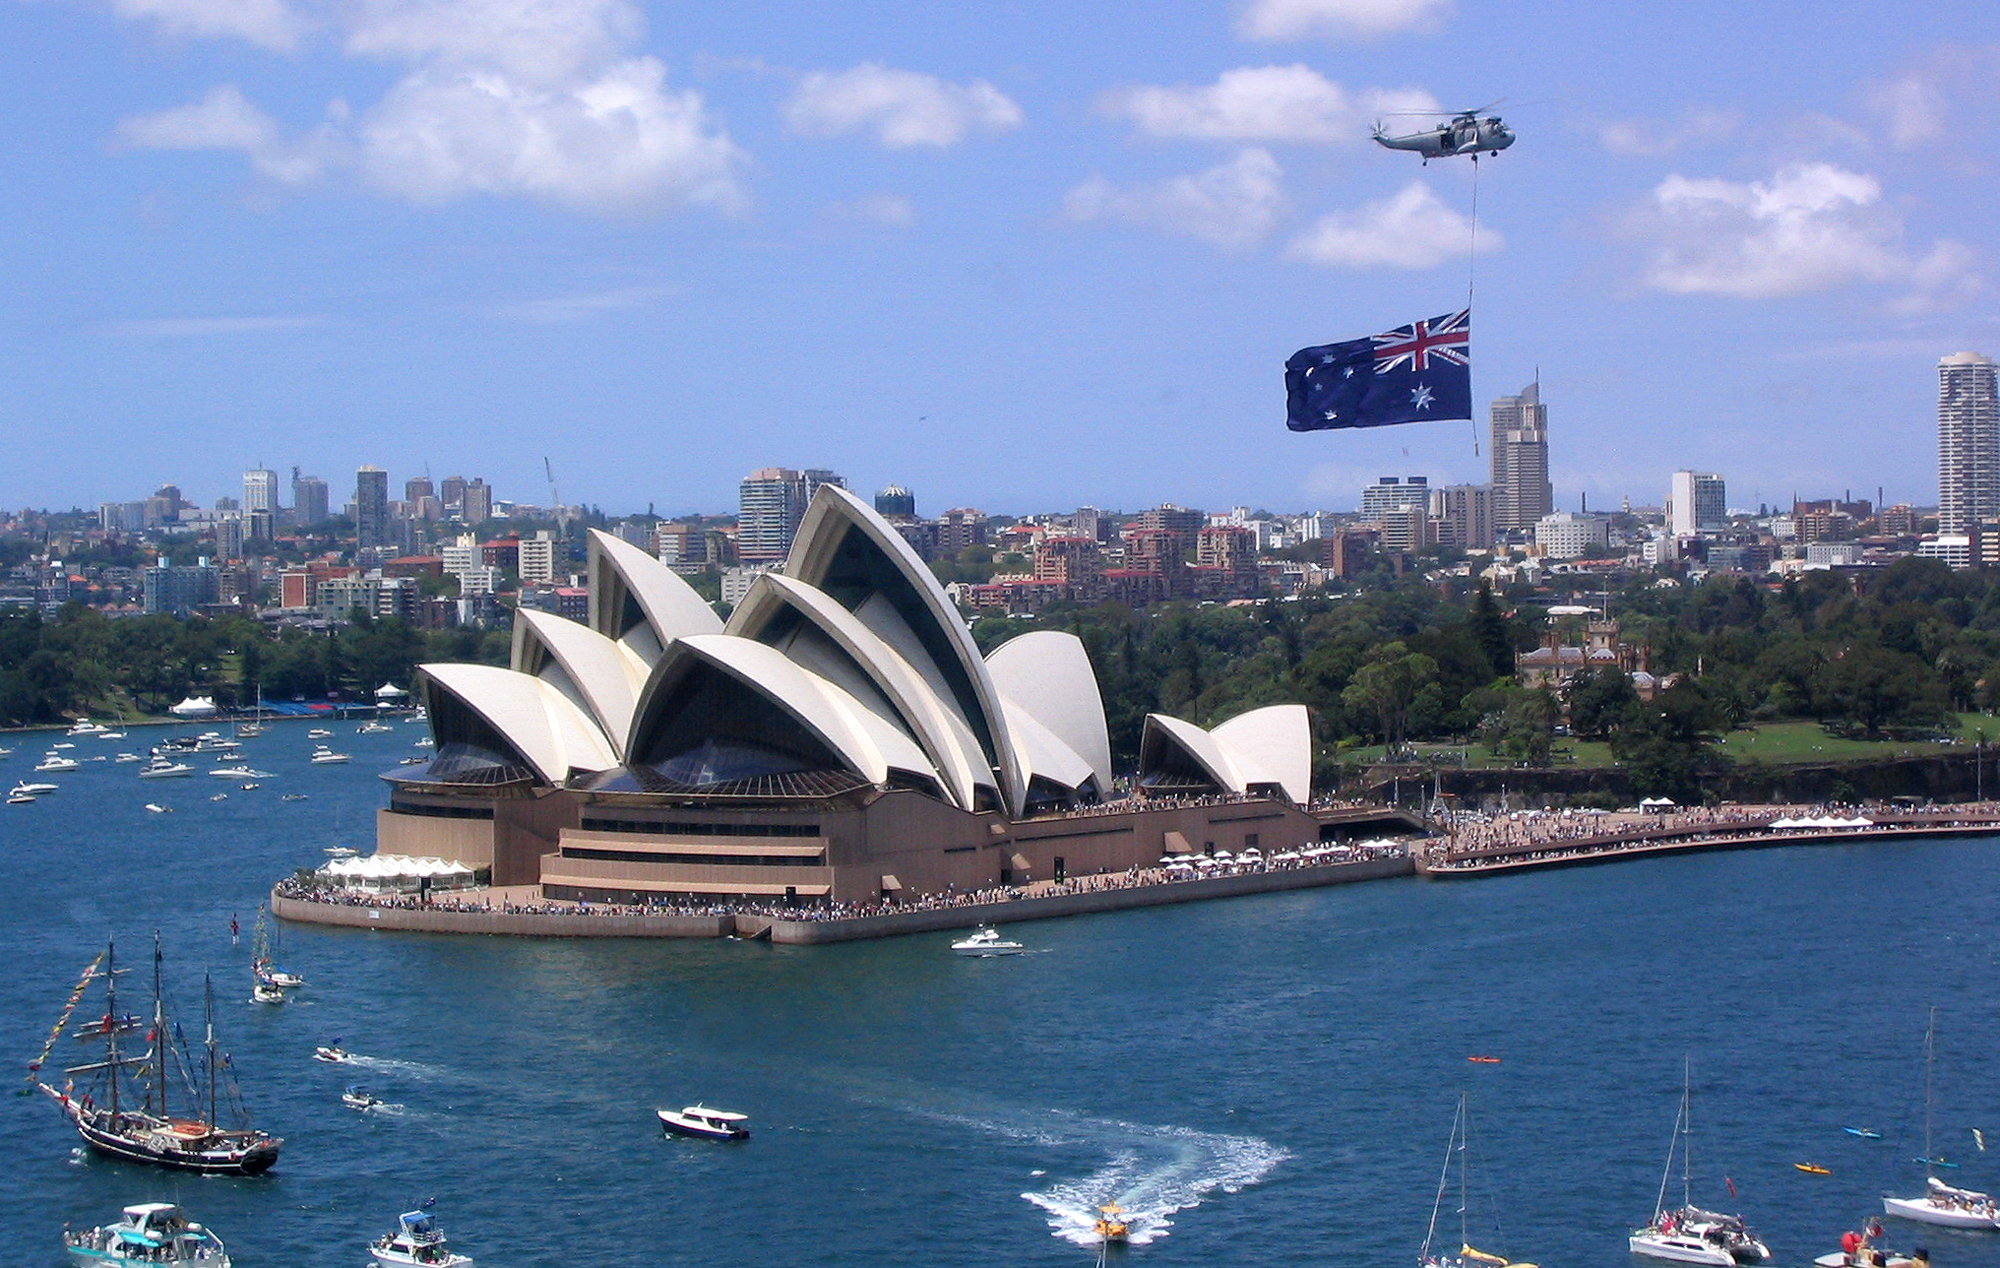 Helicopter with Australian flag flies over Sydney Opera House on sunny day with boats nearby